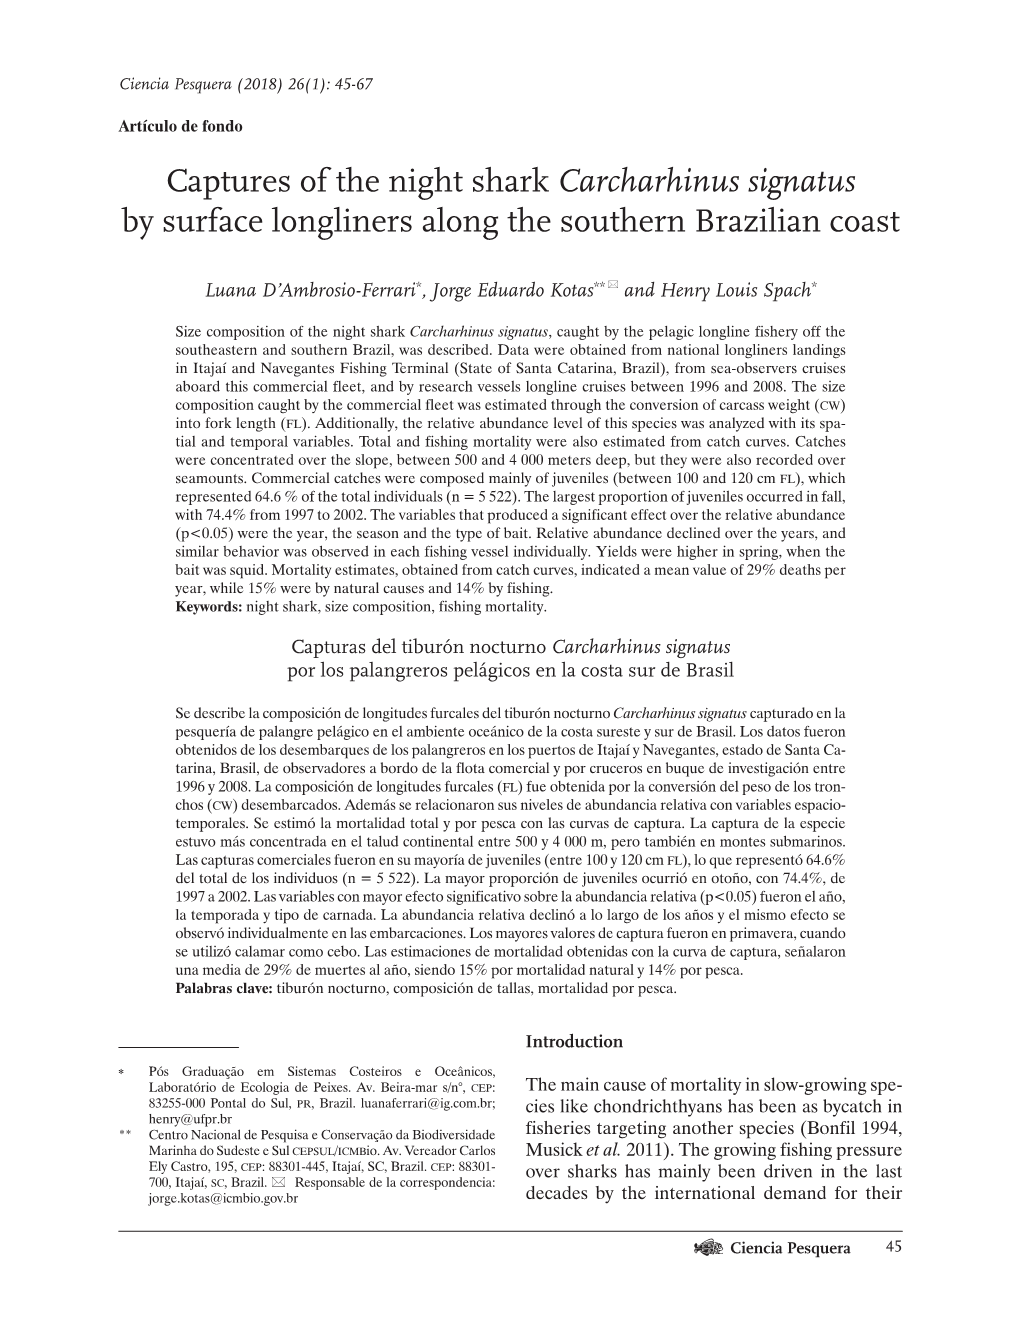 Captures of the Night Shark Carcharhinus Signatus by Surface Longliners Along the Southern Brazilian Coast